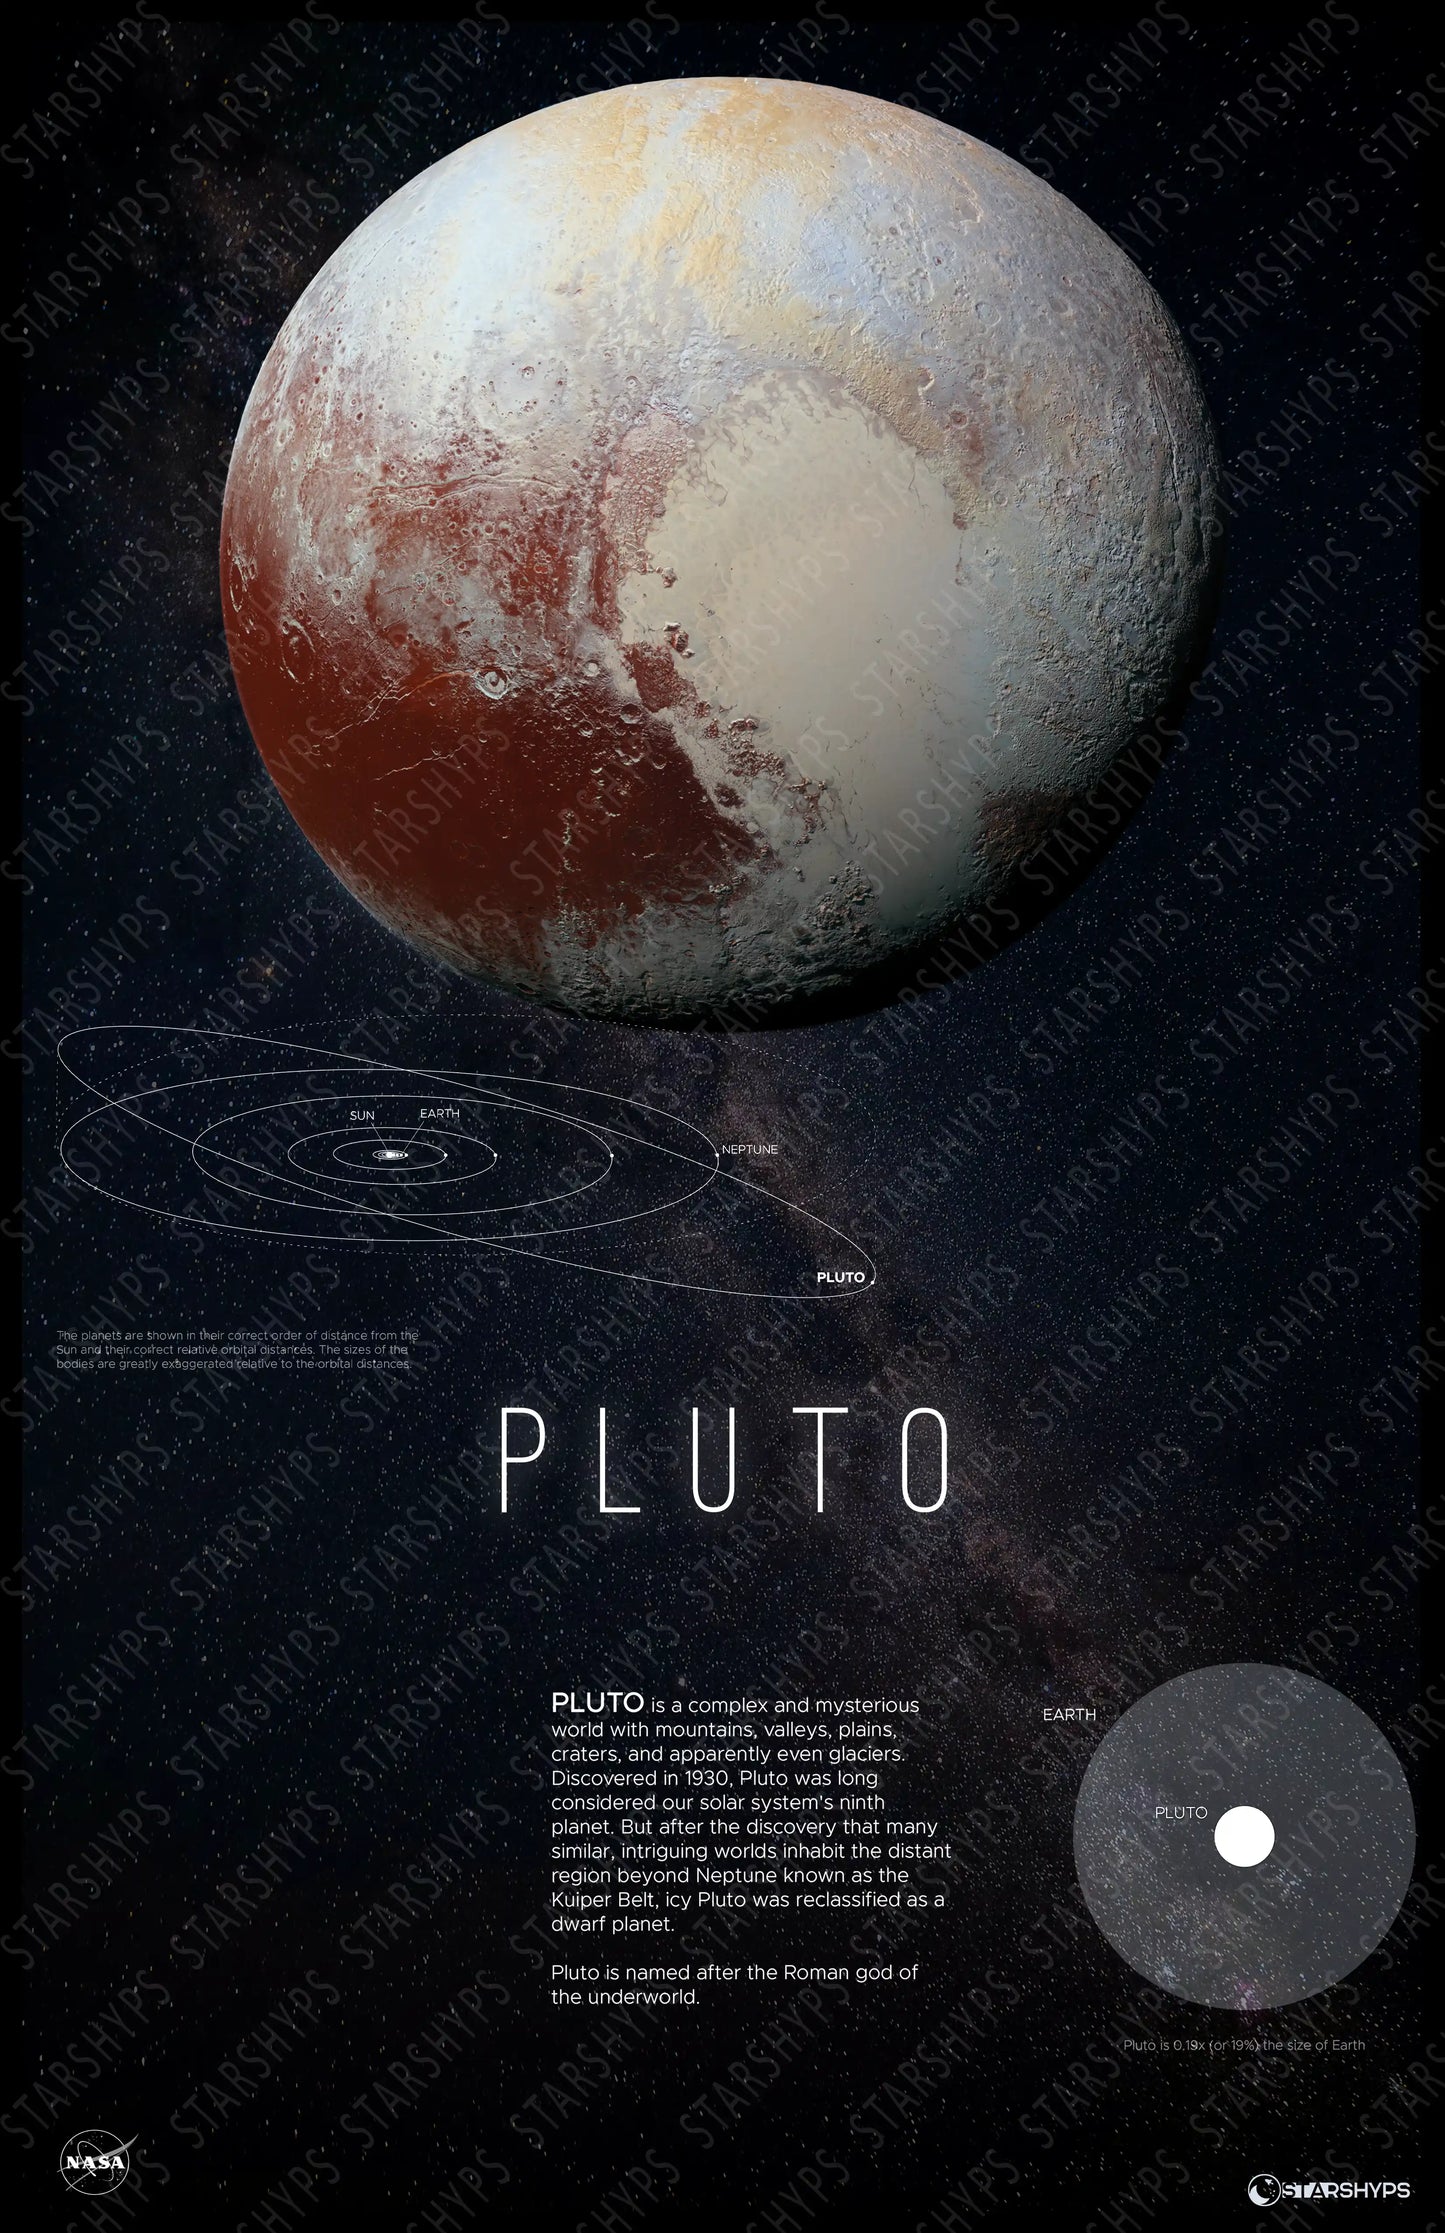 Pluto's Enigmatic Charm Decor | Pluto Print | Rocket Blueprint Posters | A poster of Pluto is set against a dark background. The title "PLUTO" is featured at the bottom, with a paragraph detailing the planet's characteristics and a diagram comparing Pluto's size to Earth.